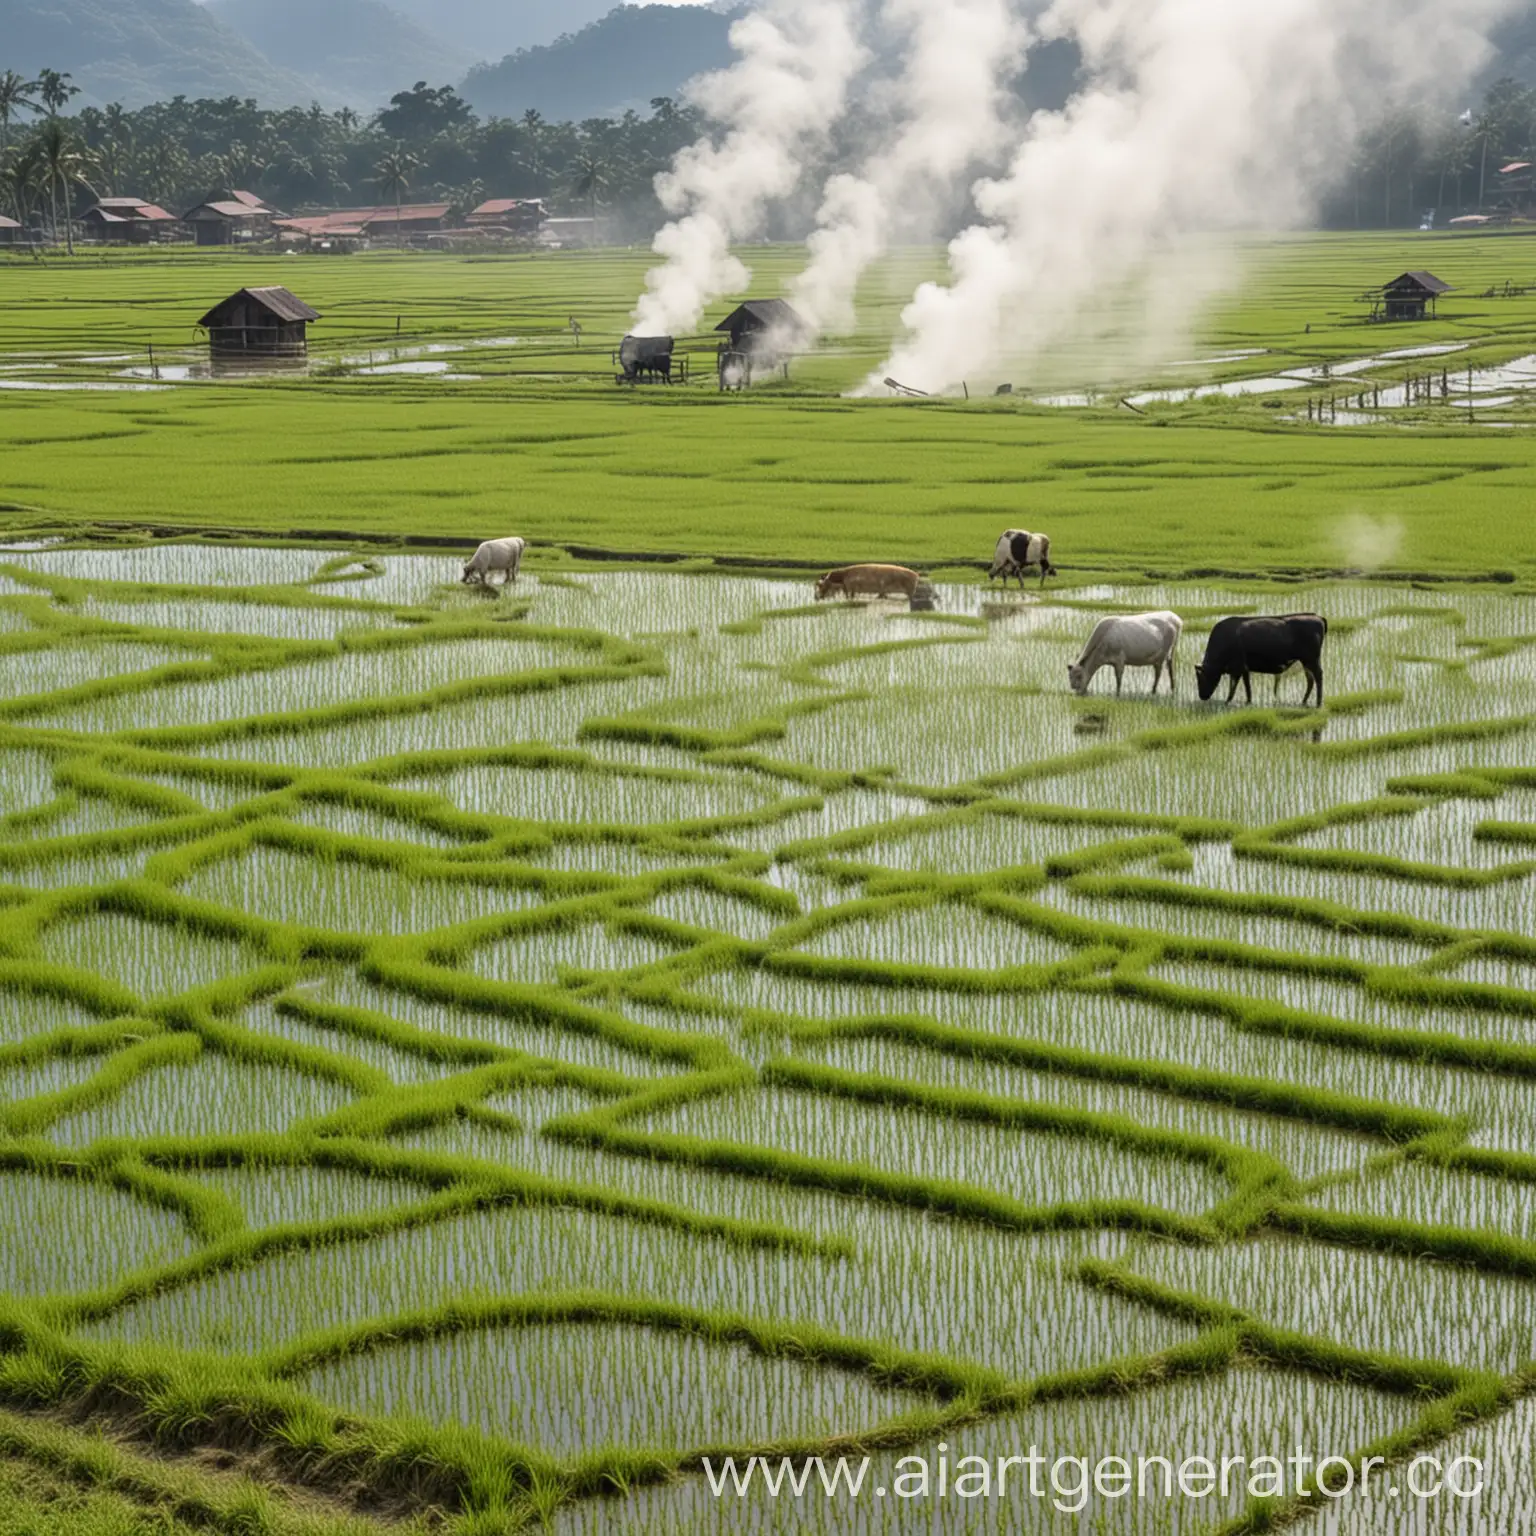 Agricultural-Methane-Emissions-Rice-Fields-Livestock-and-Farming